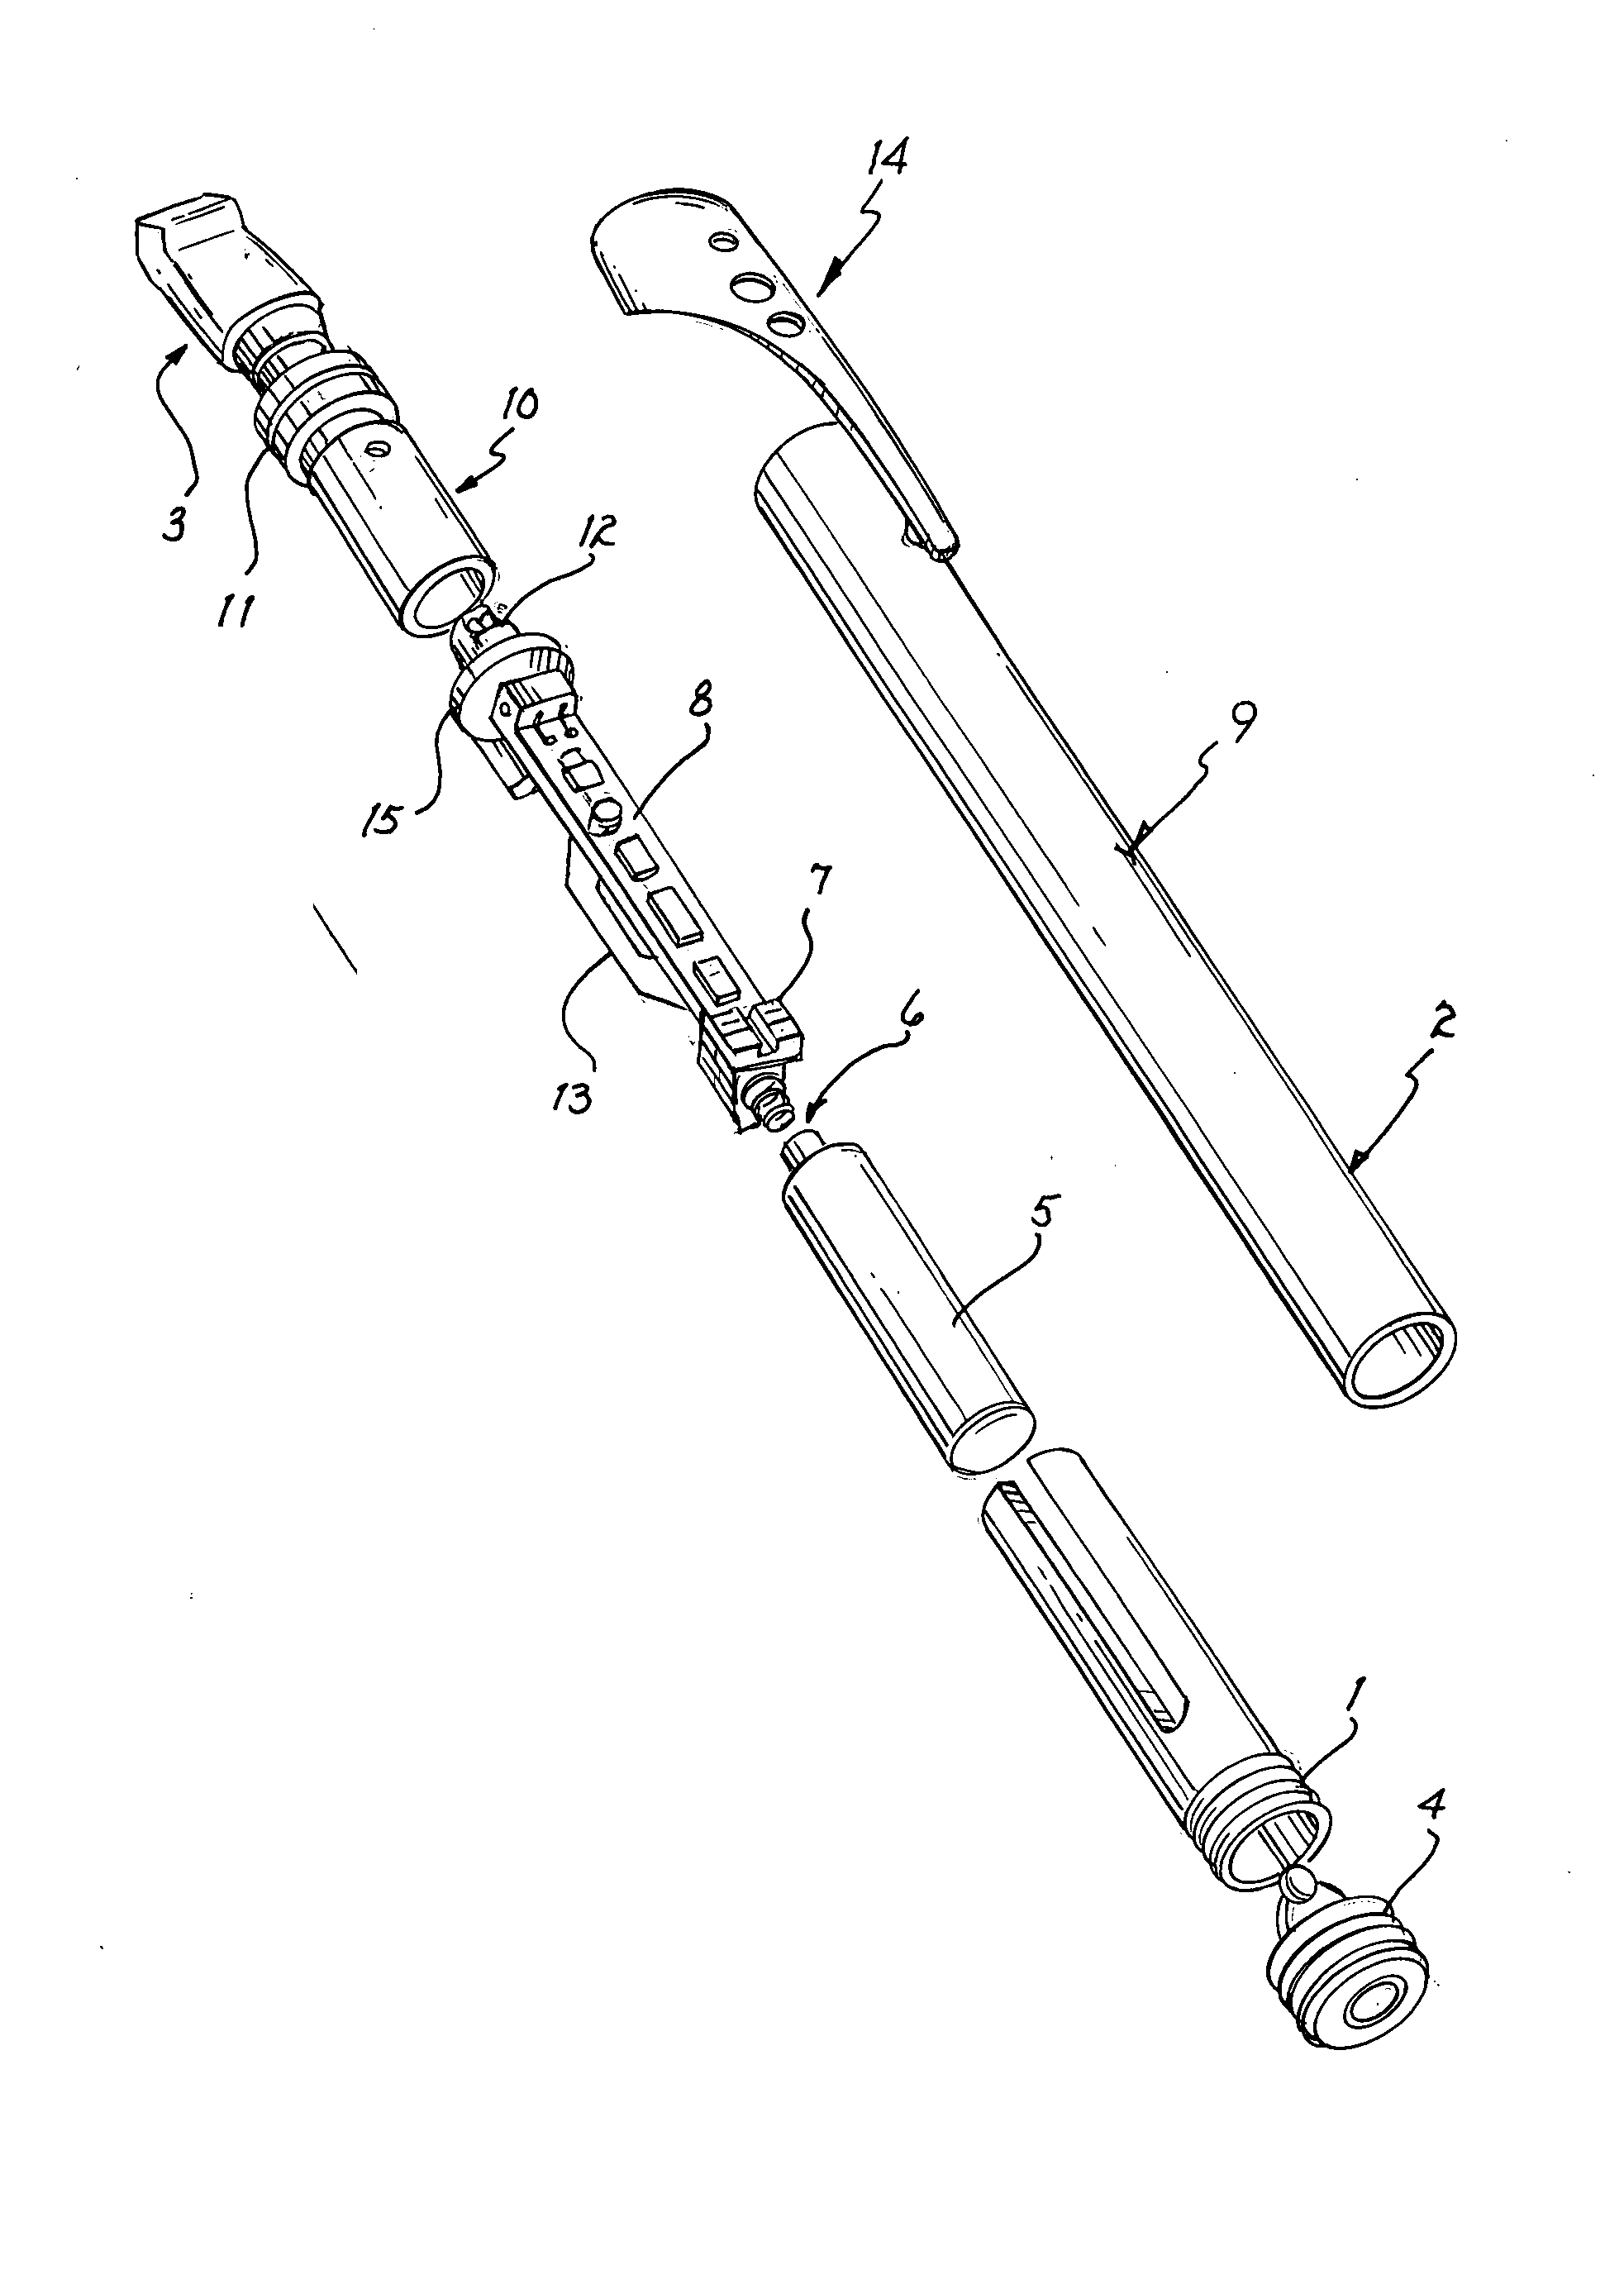 Electronic evaporable substance delivery device and method